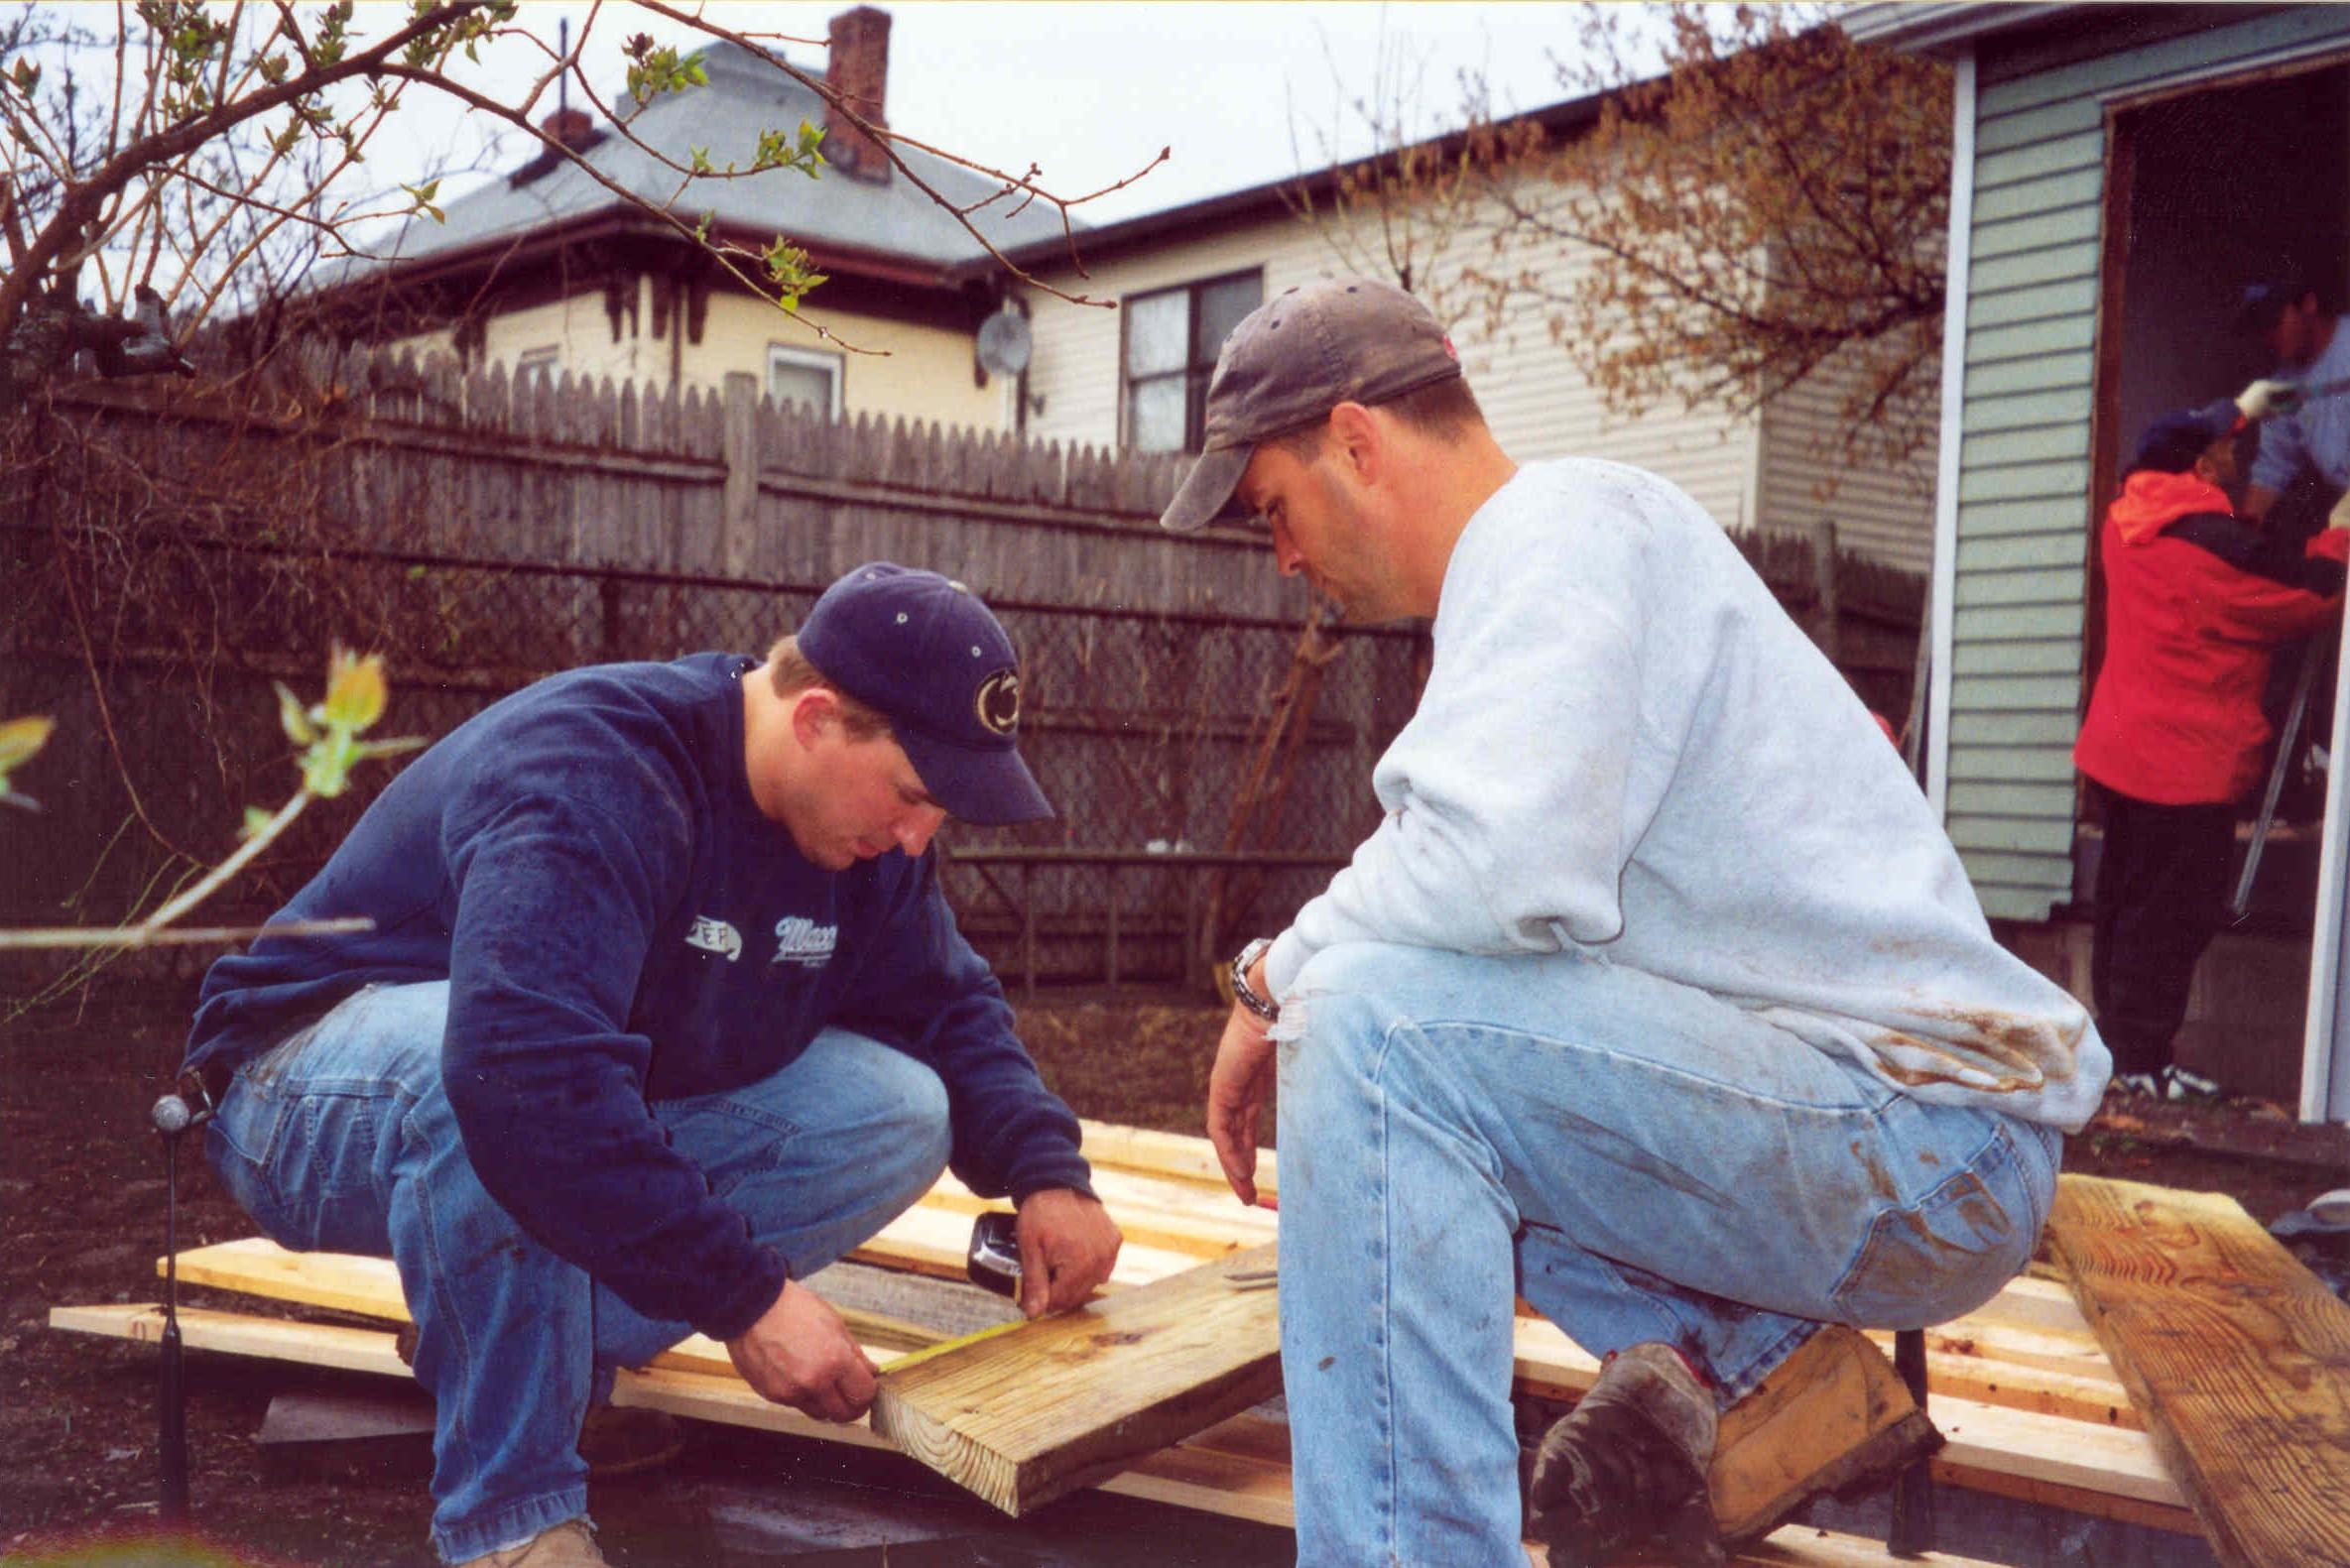 Chuck Tobin and Jeff Palmer work on a community service project together (2003)